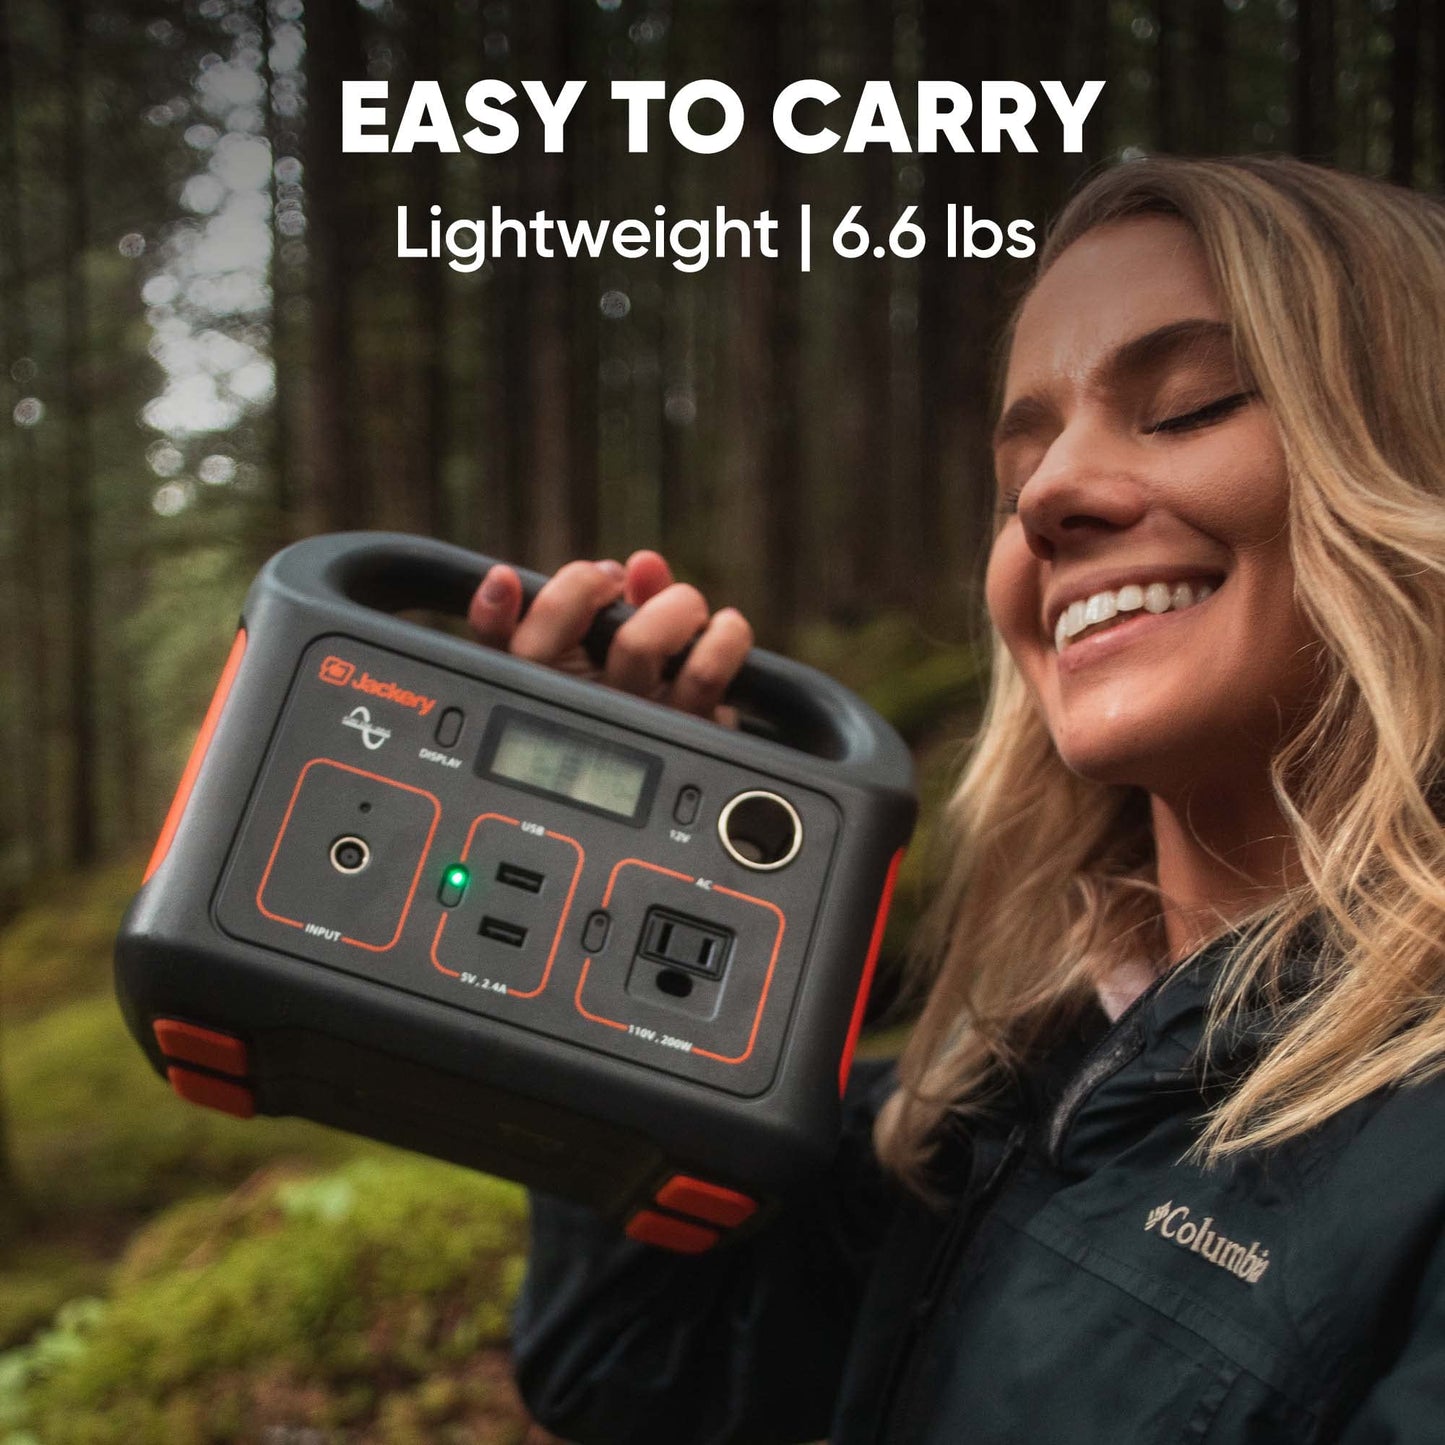 Jackery Portable Power Station Explorer 240, 240Wh Backup Lithium Battery, 110V/200W Pure Sine Wave AC Outlet, Solar Generator (Solar Panel Not Included) for Outdoors Camping Travel Hunting Emergency Portable Power Station 240